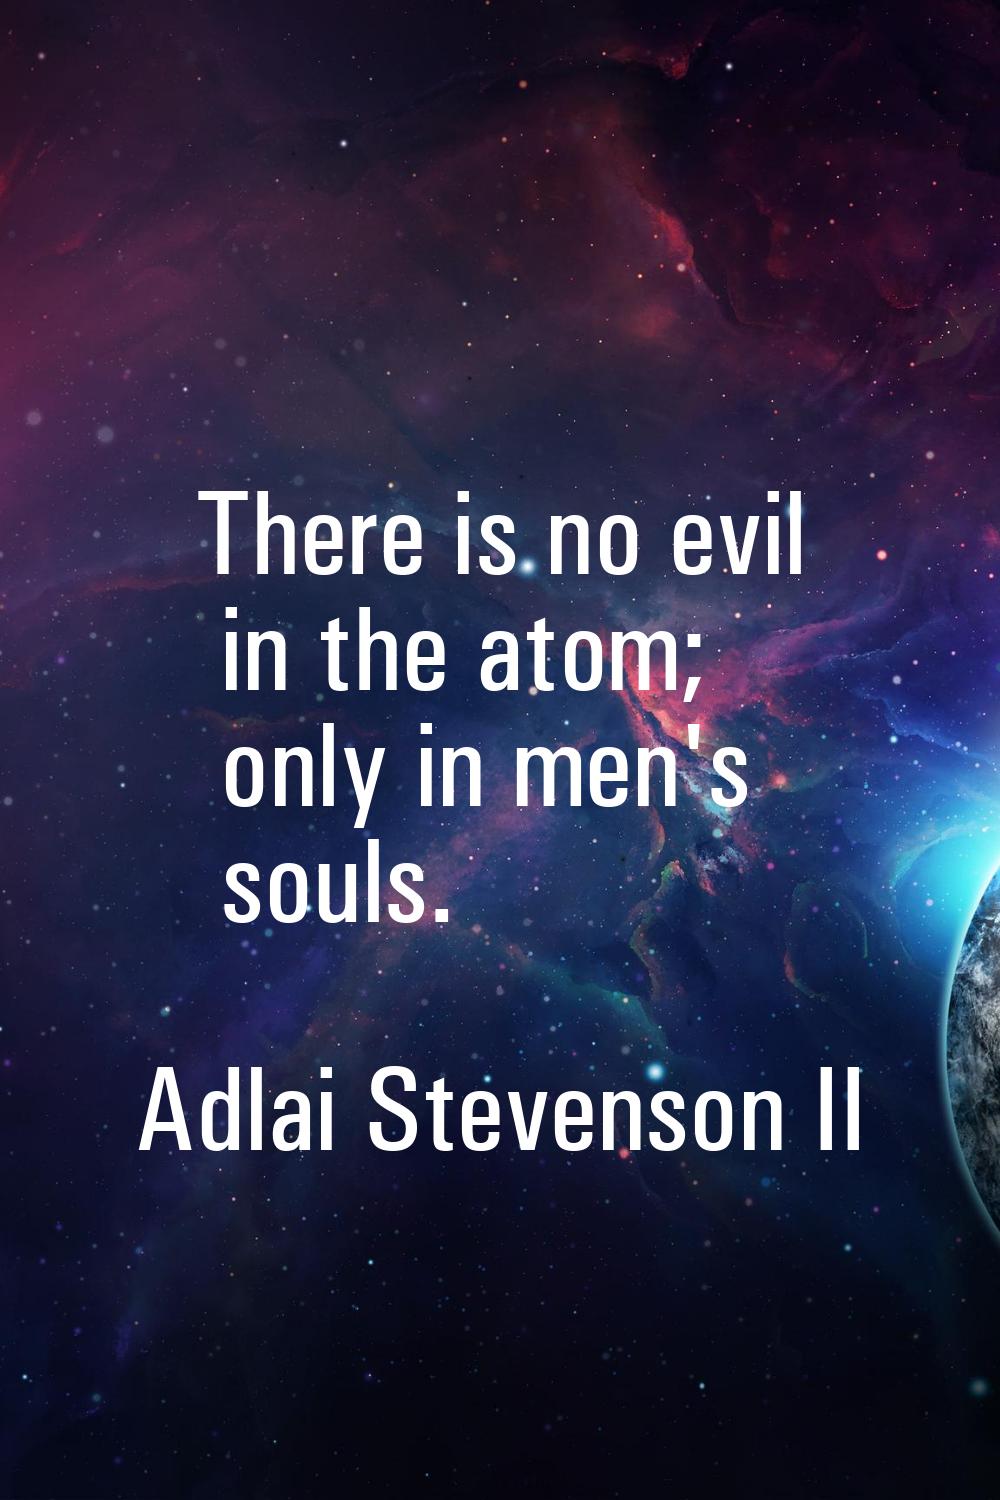 There is no evil in the atom; only in men's souls.